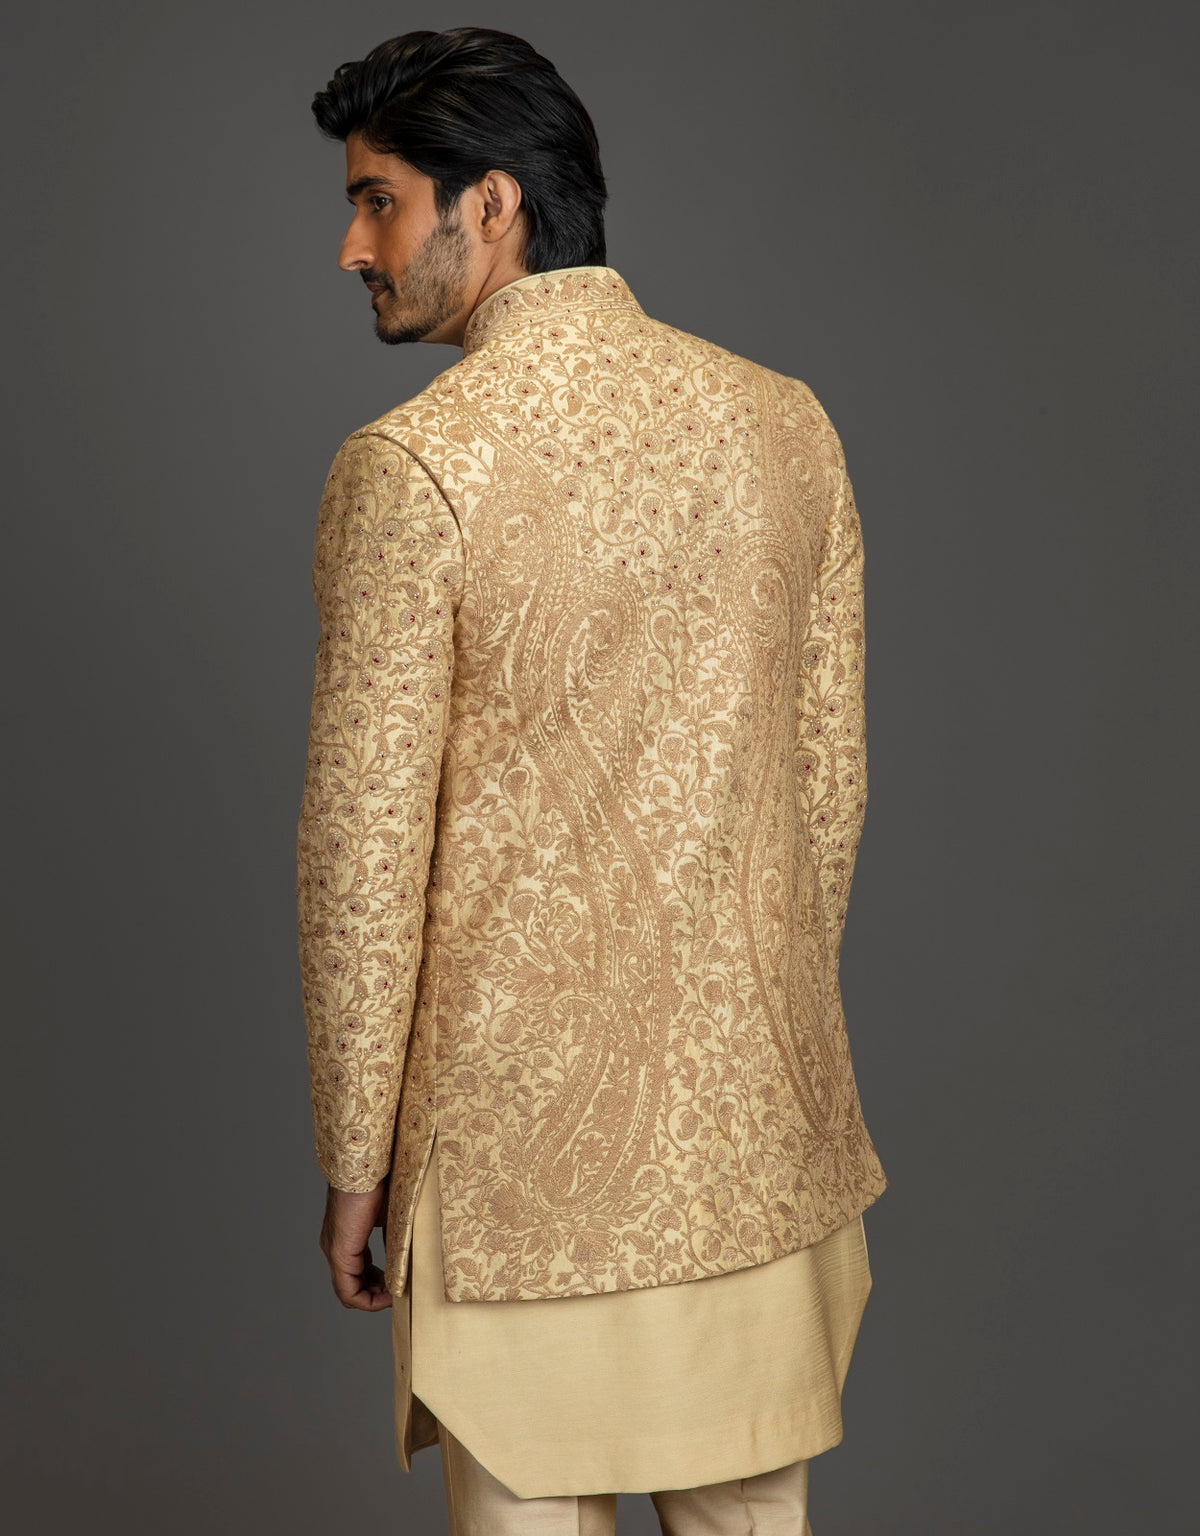 CLASSIC GOLD OPEN JACKET INDO WESTERN